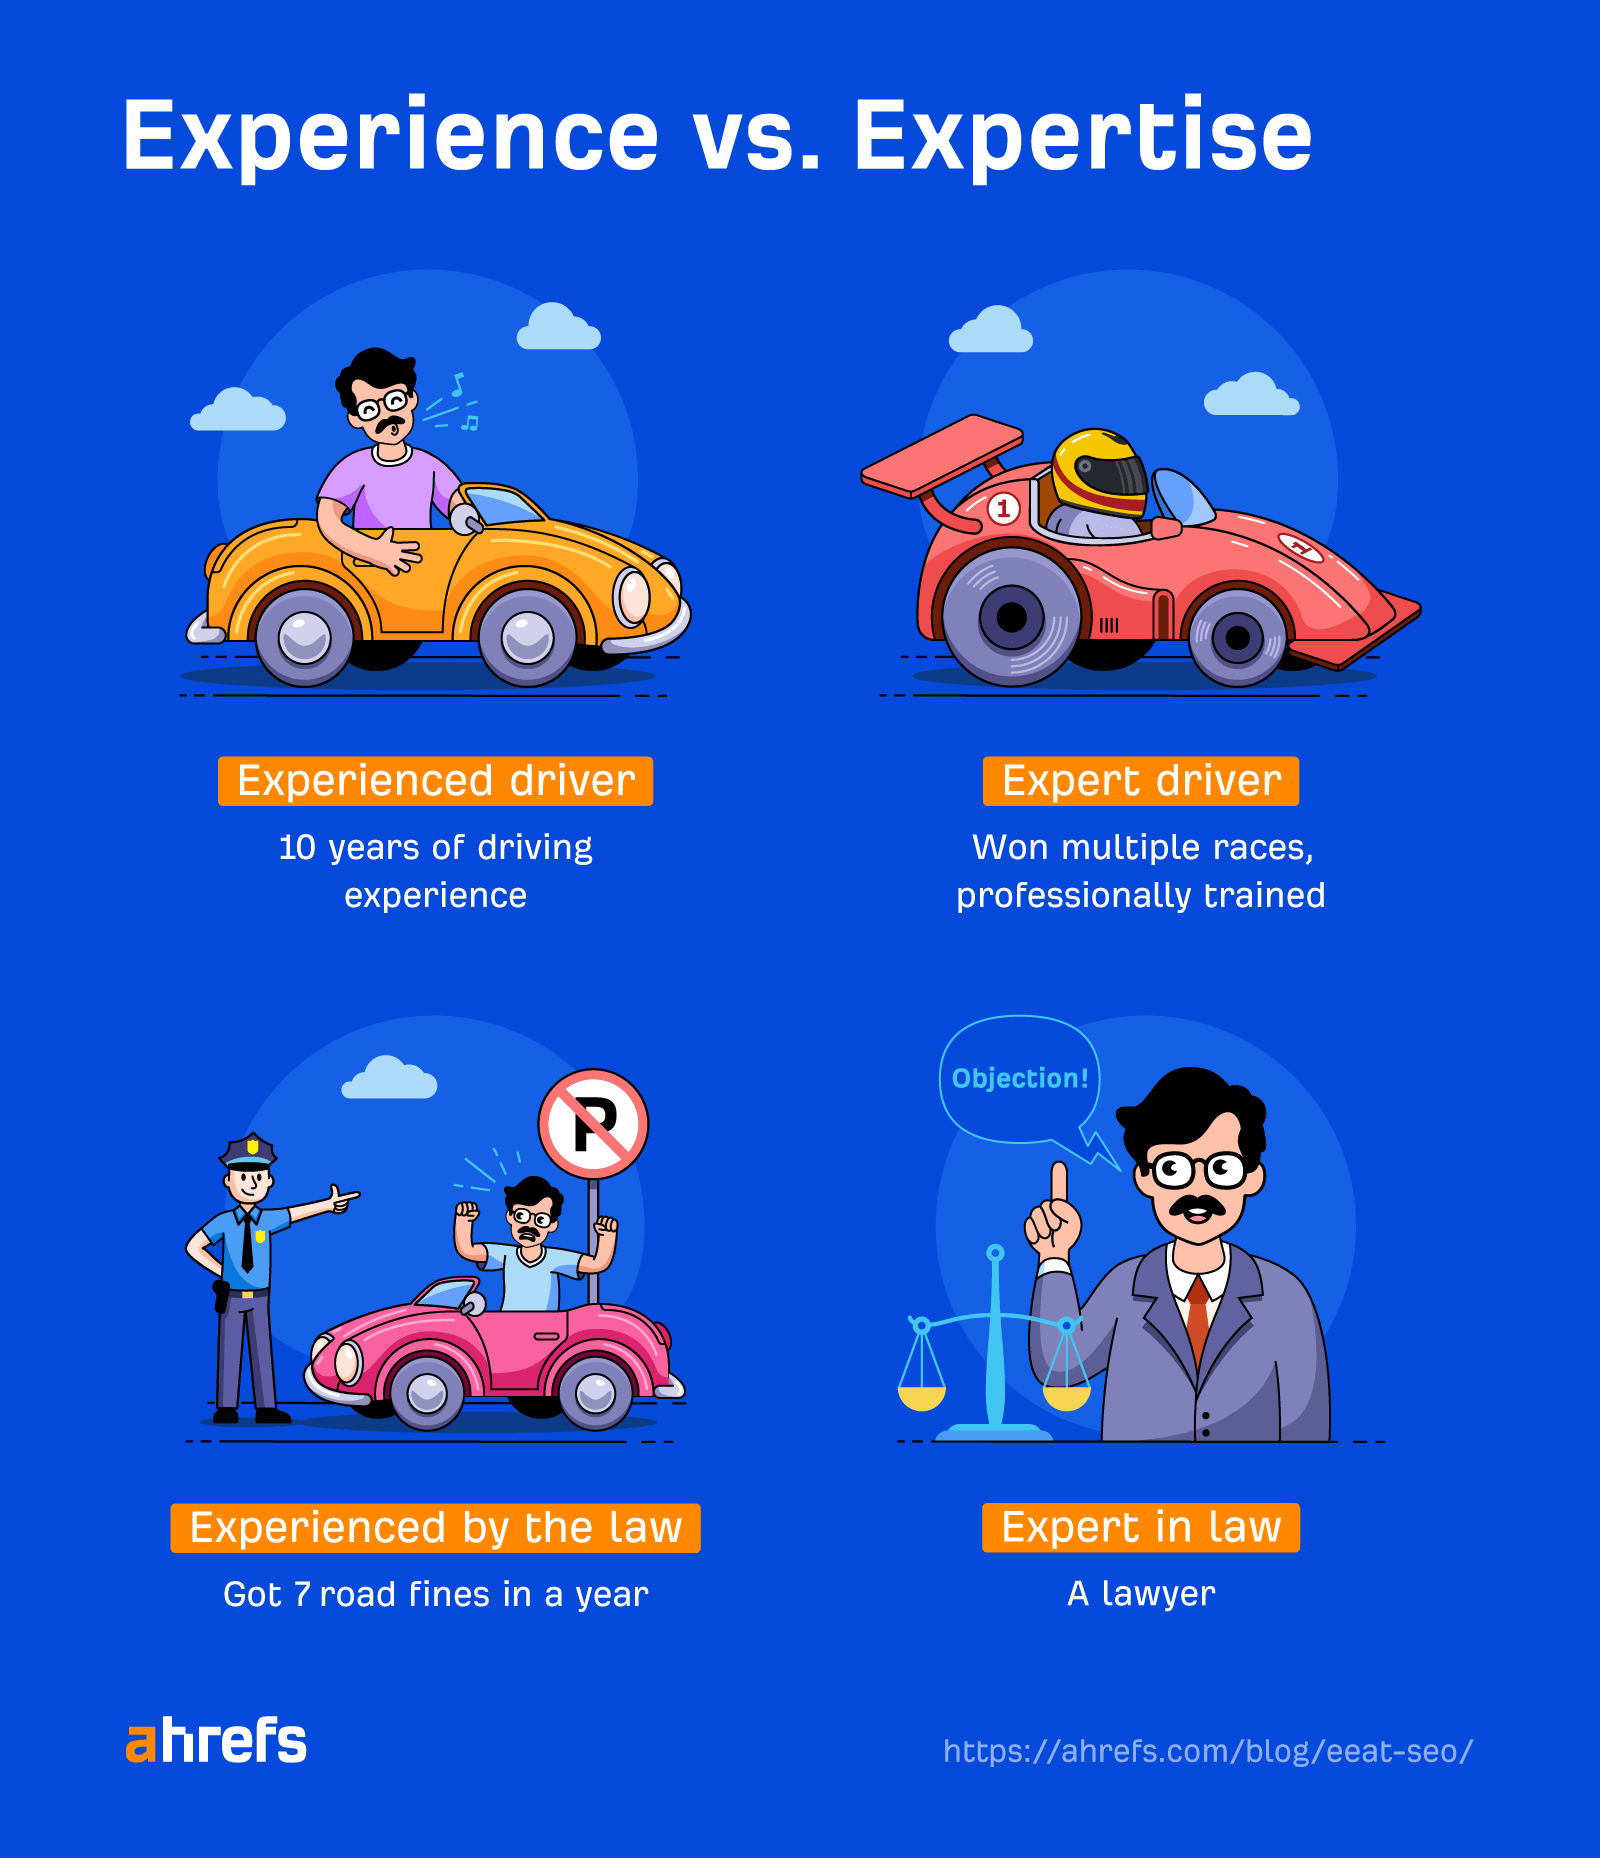 Showcasing the difference between experience and expertise
